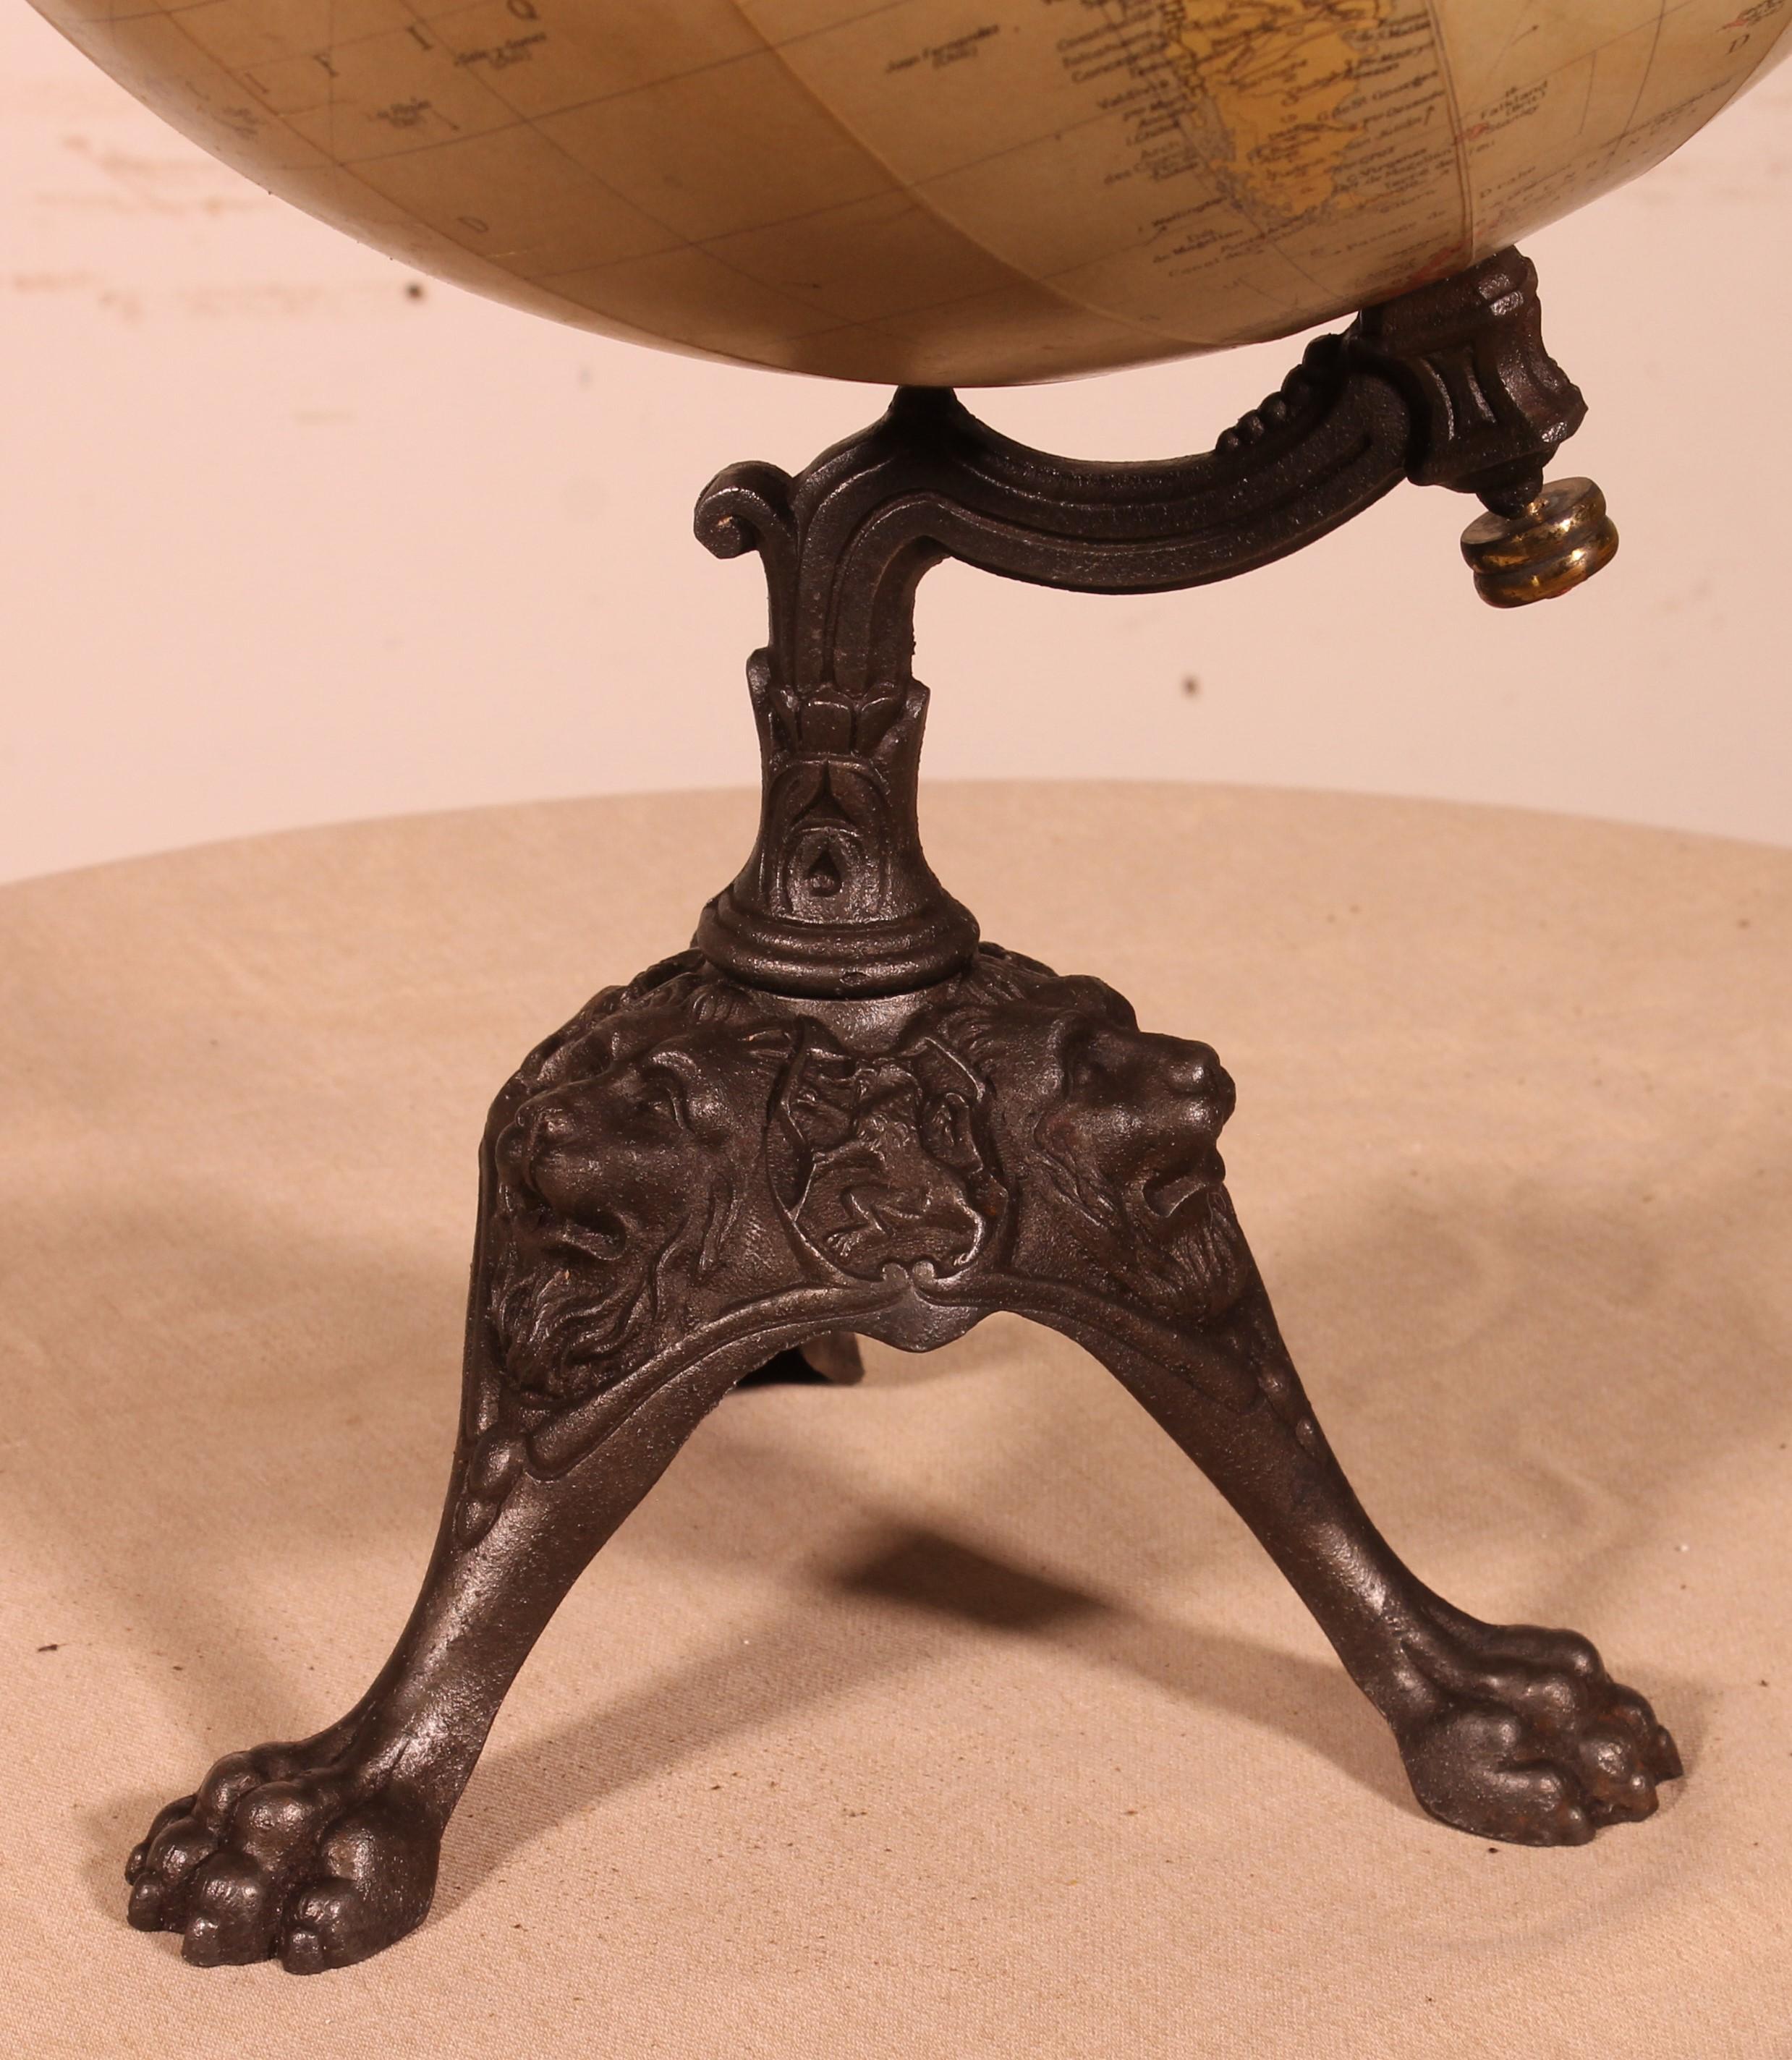 Very beautiful Terrestrial Globe made by Philips Londre based on the maps of Taride Paris Boulevard Saint Germain

The Terrestrial Globe has a very beautiful cast iron base decorated with lion heads and ending with claws
The Globe is in